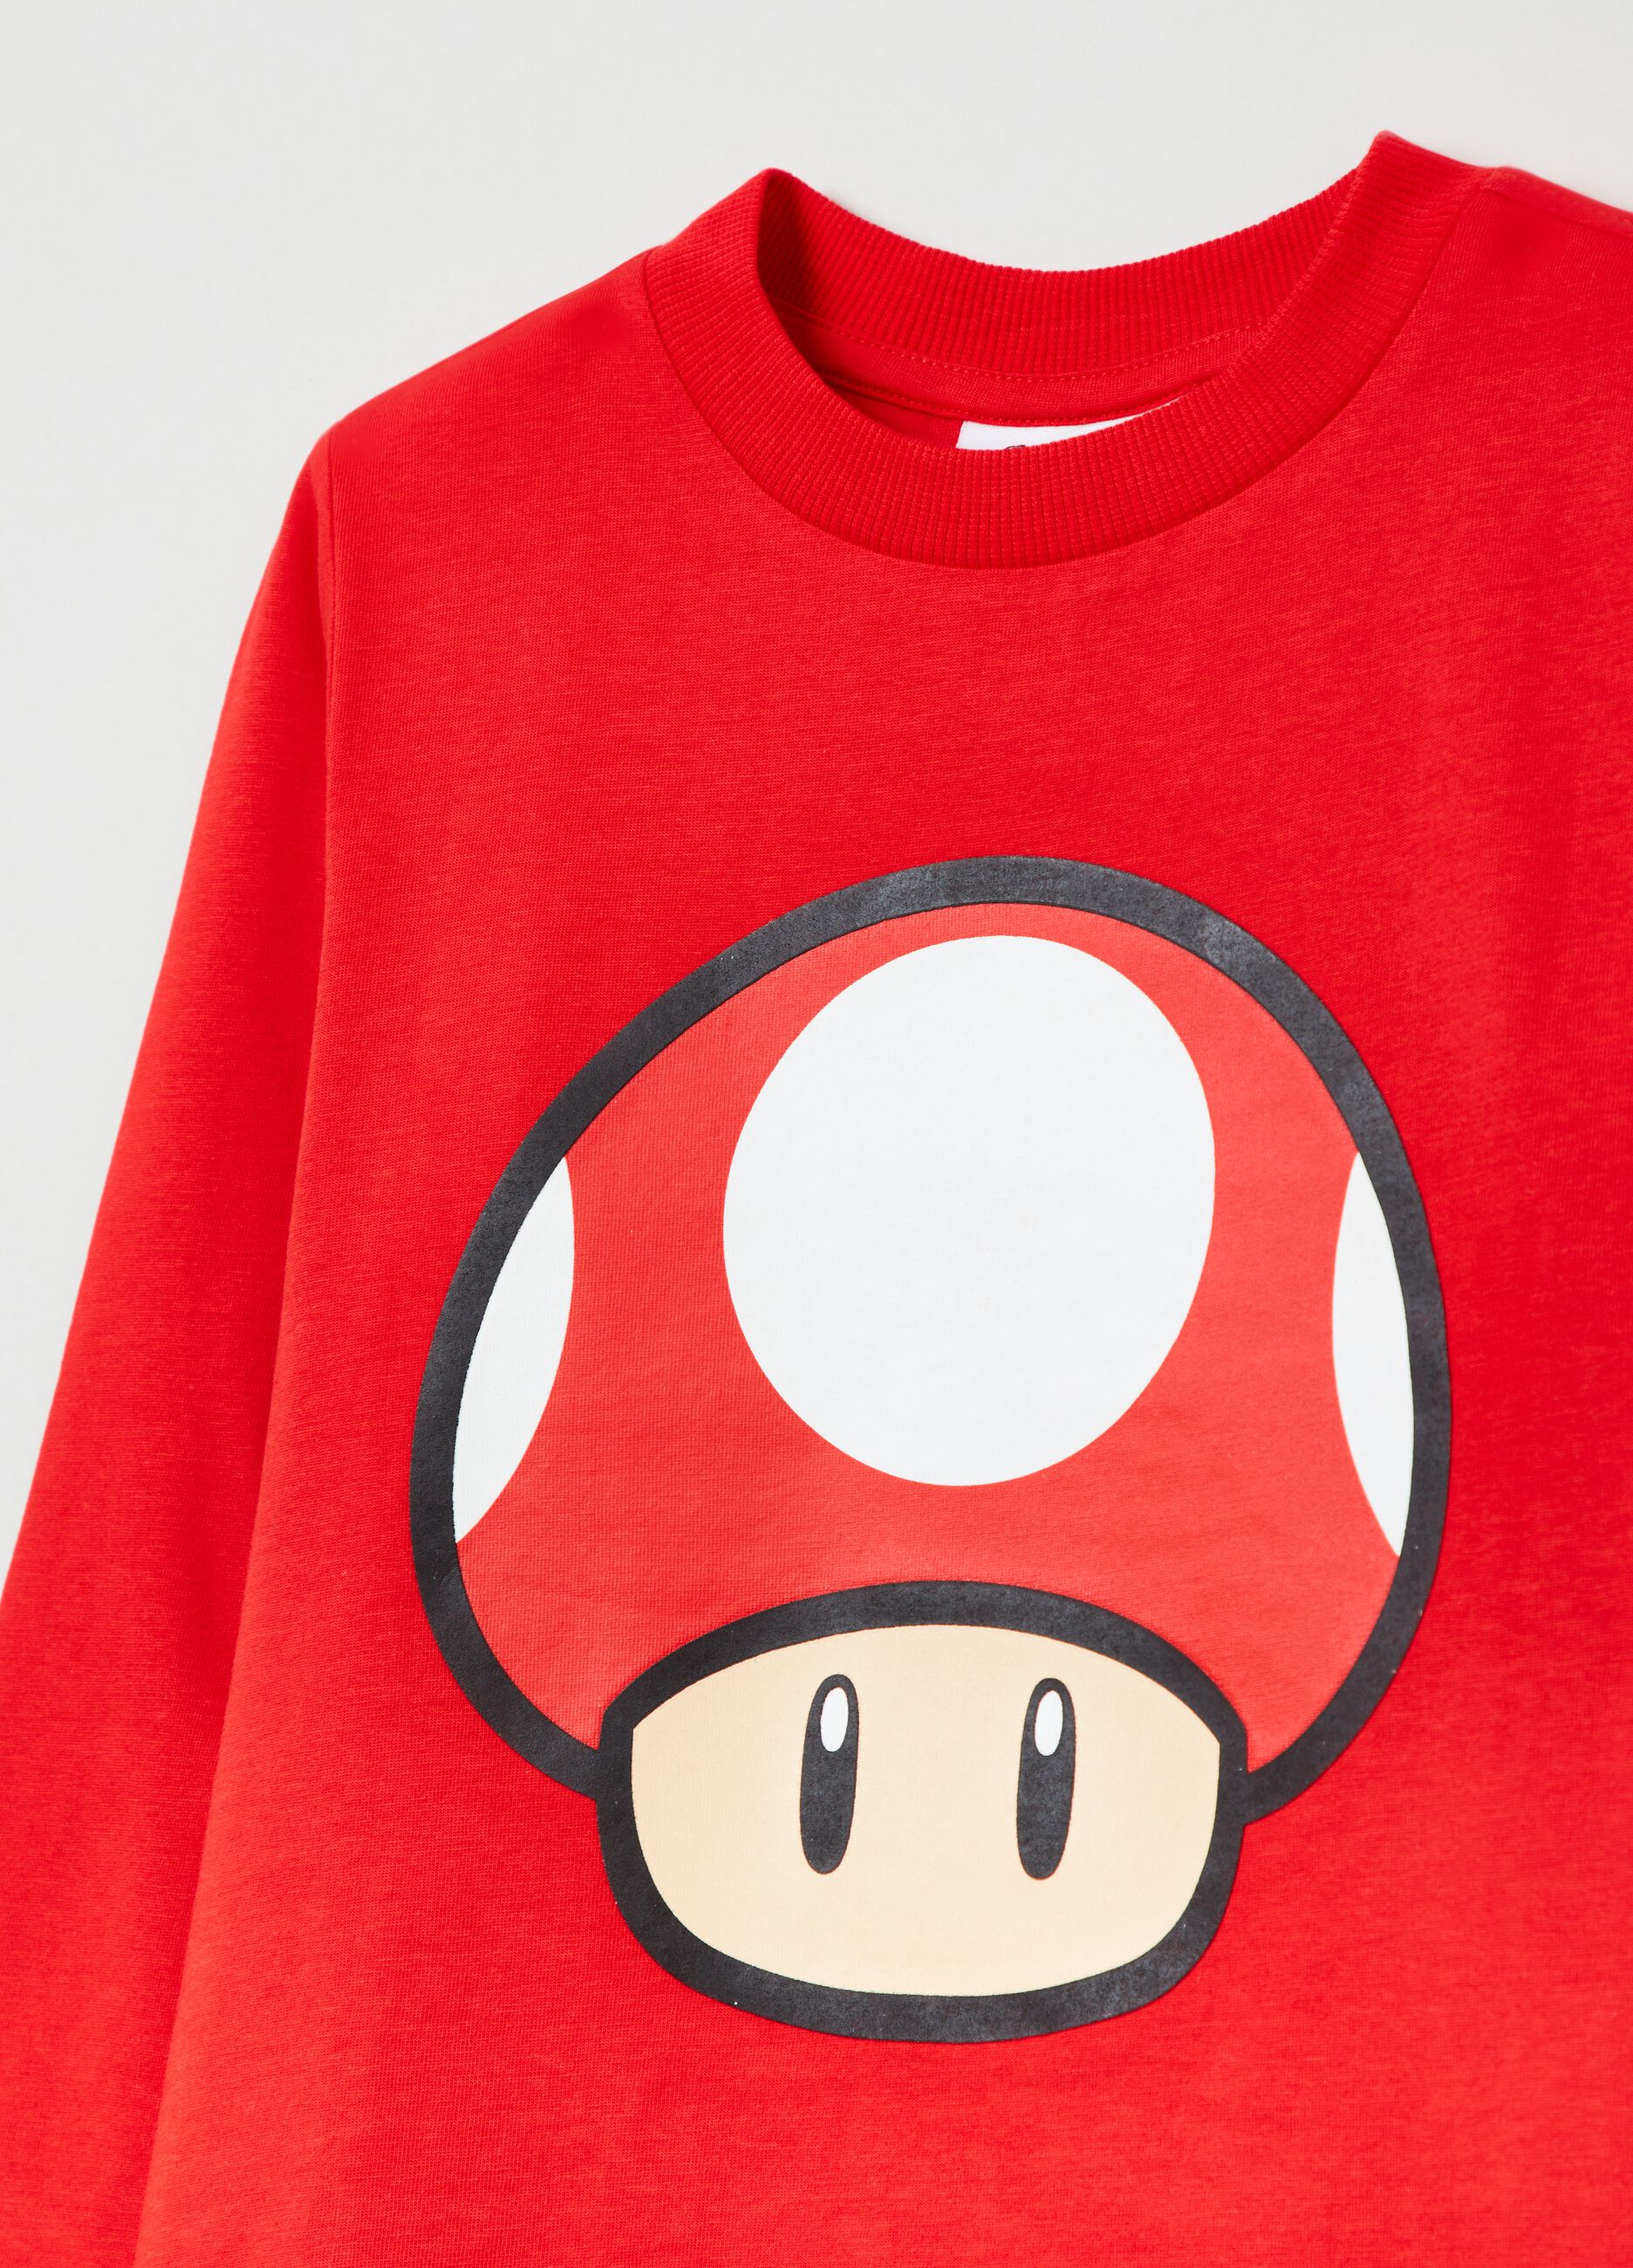 T-shirt with long sleeves and Super Mario print